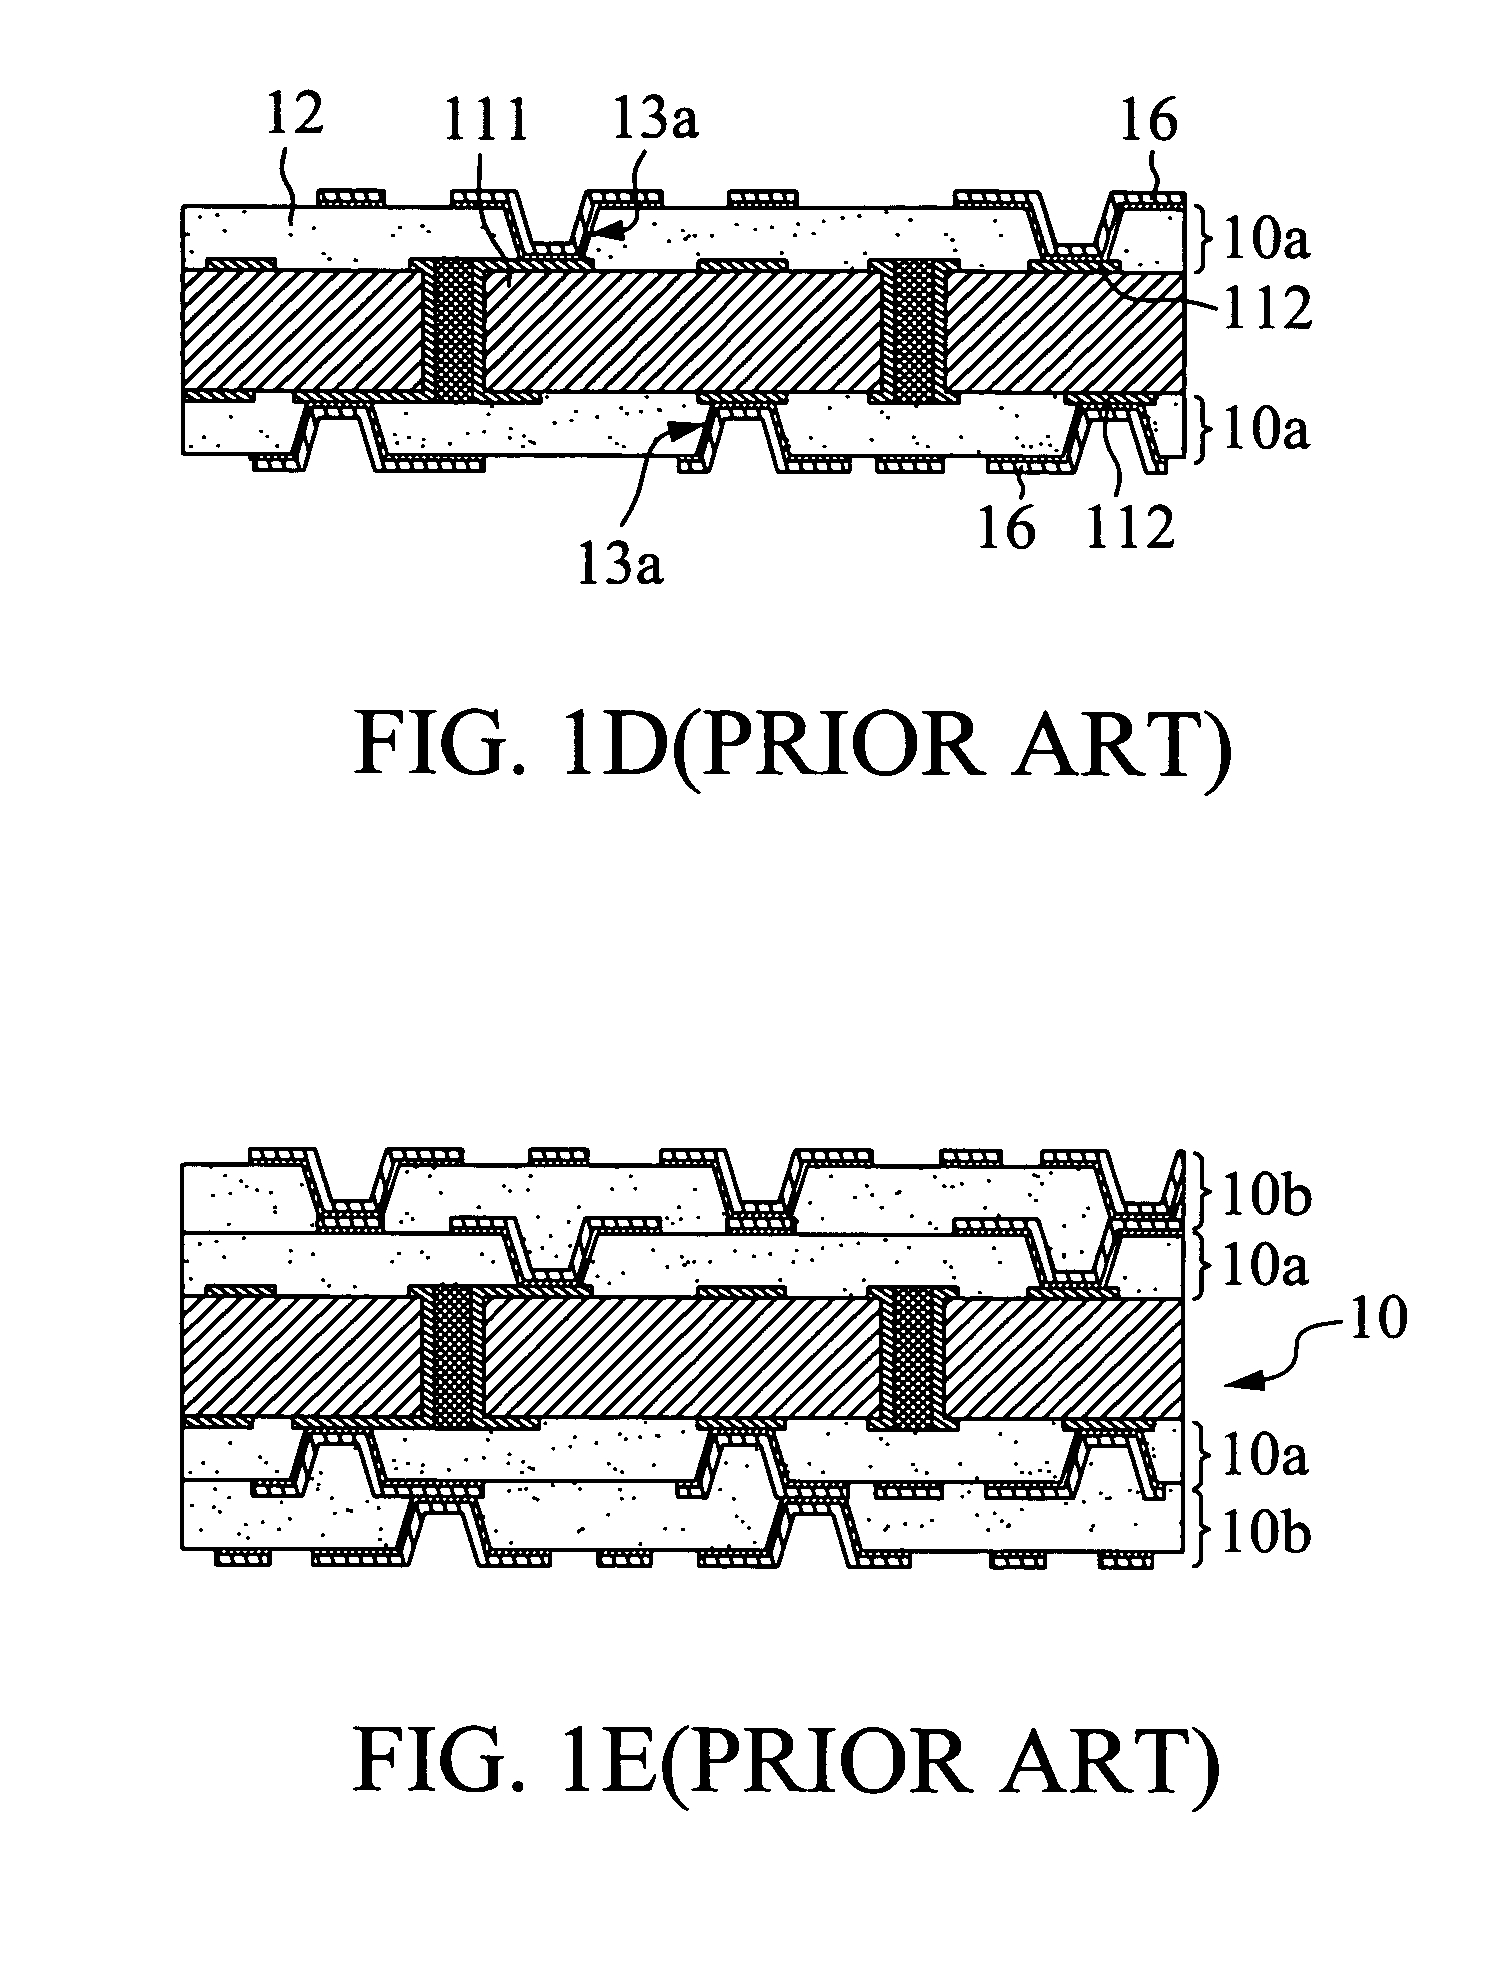 Method for fabricating a flip chip substrate structure